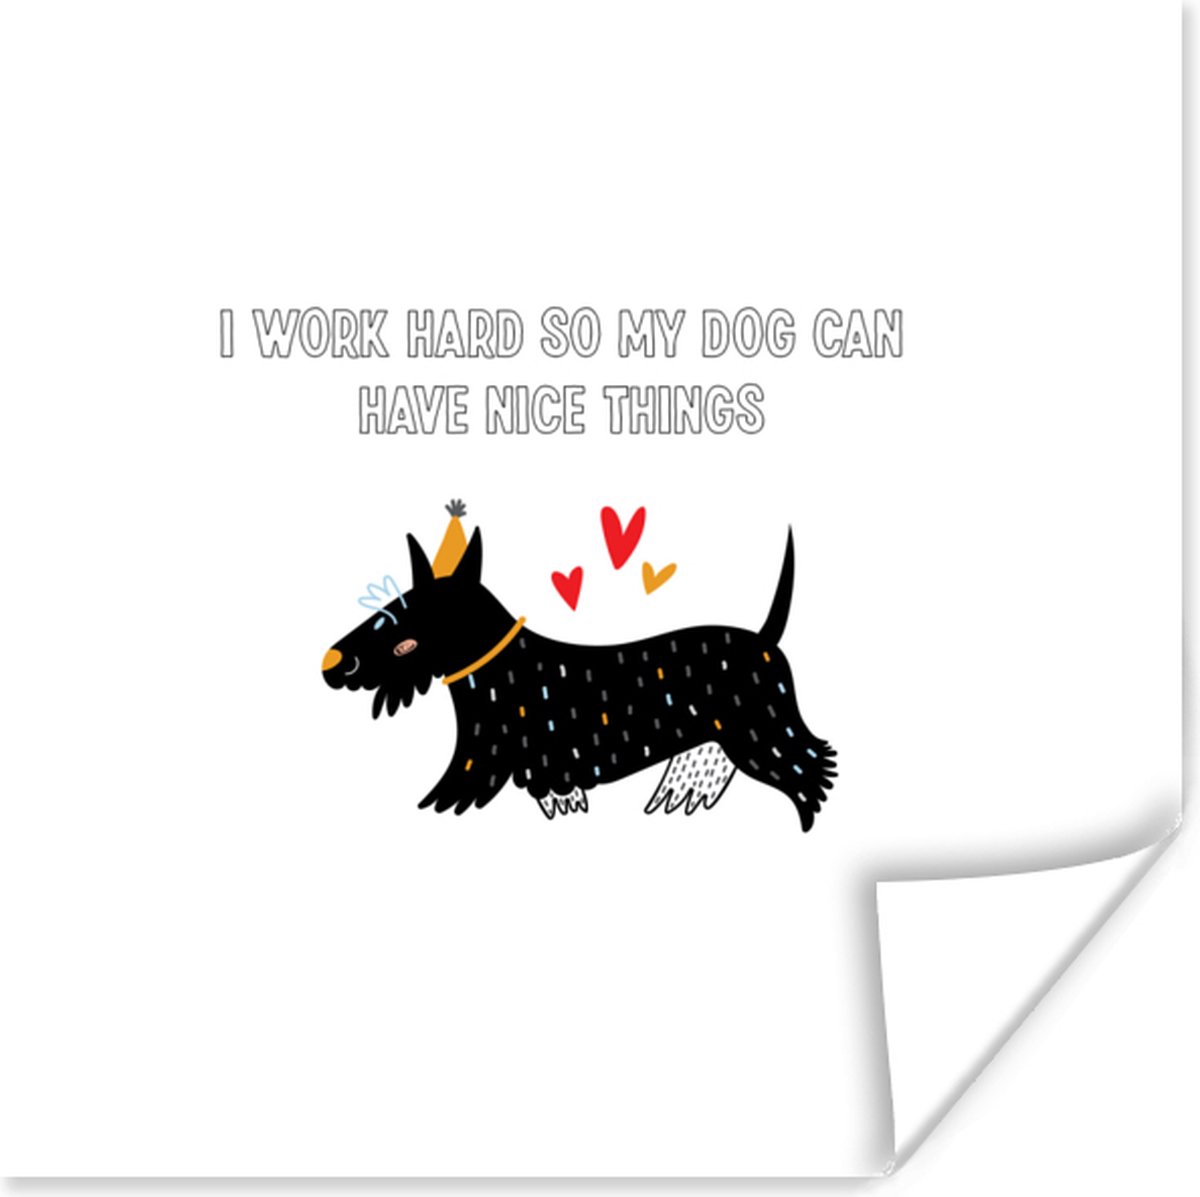 Poster Quotes - I work hard so my dog can have nice things - Spreuken - Honden - 50x50 cm - PosterMonkey